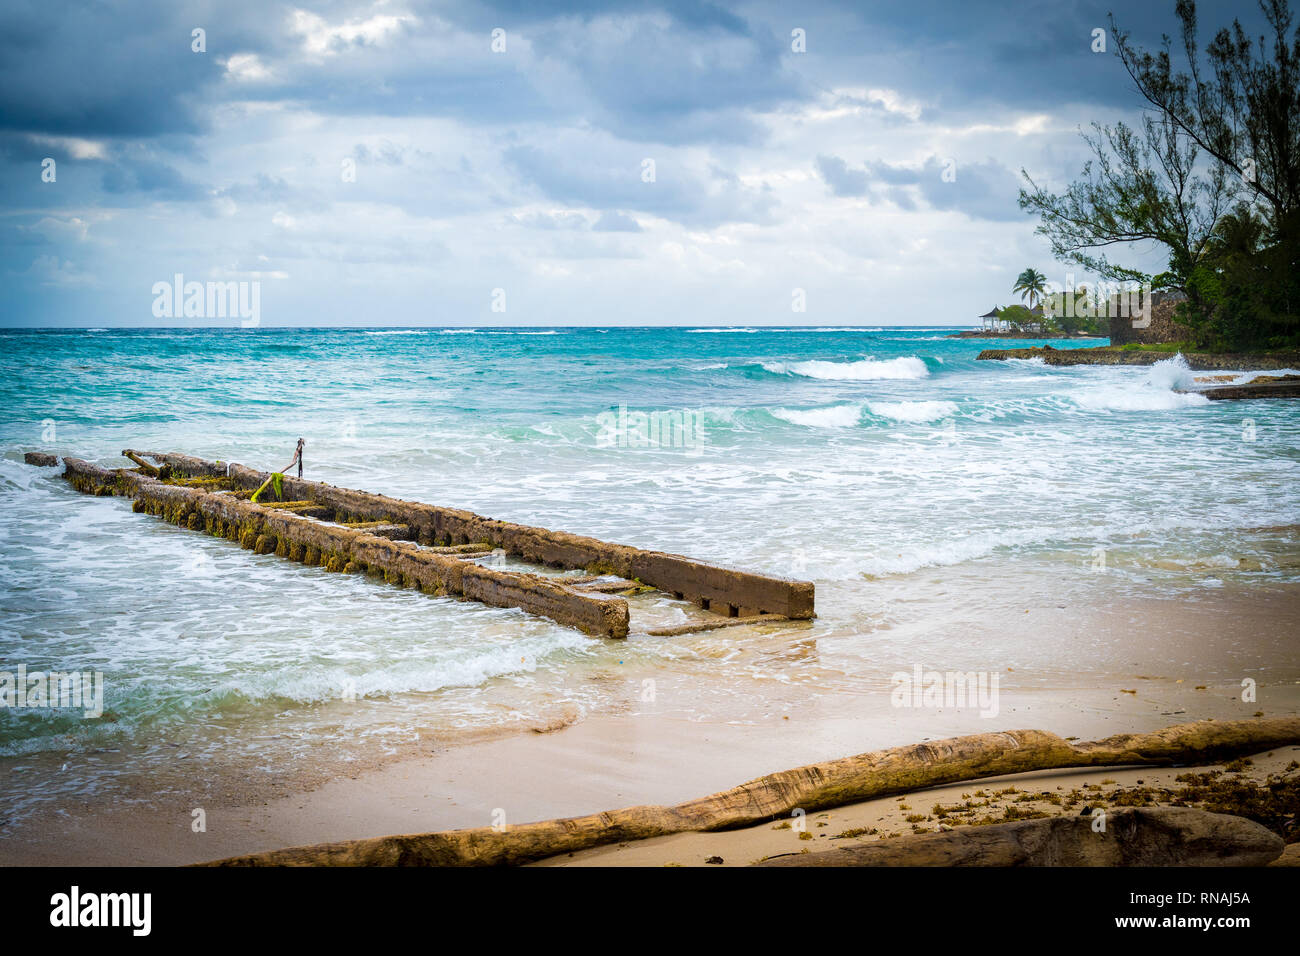 Cloudy/stormy day at the beach in Jamaica in the hurricane season. Cloudy skies, heavy wind gusts, high tides. Stock Photo